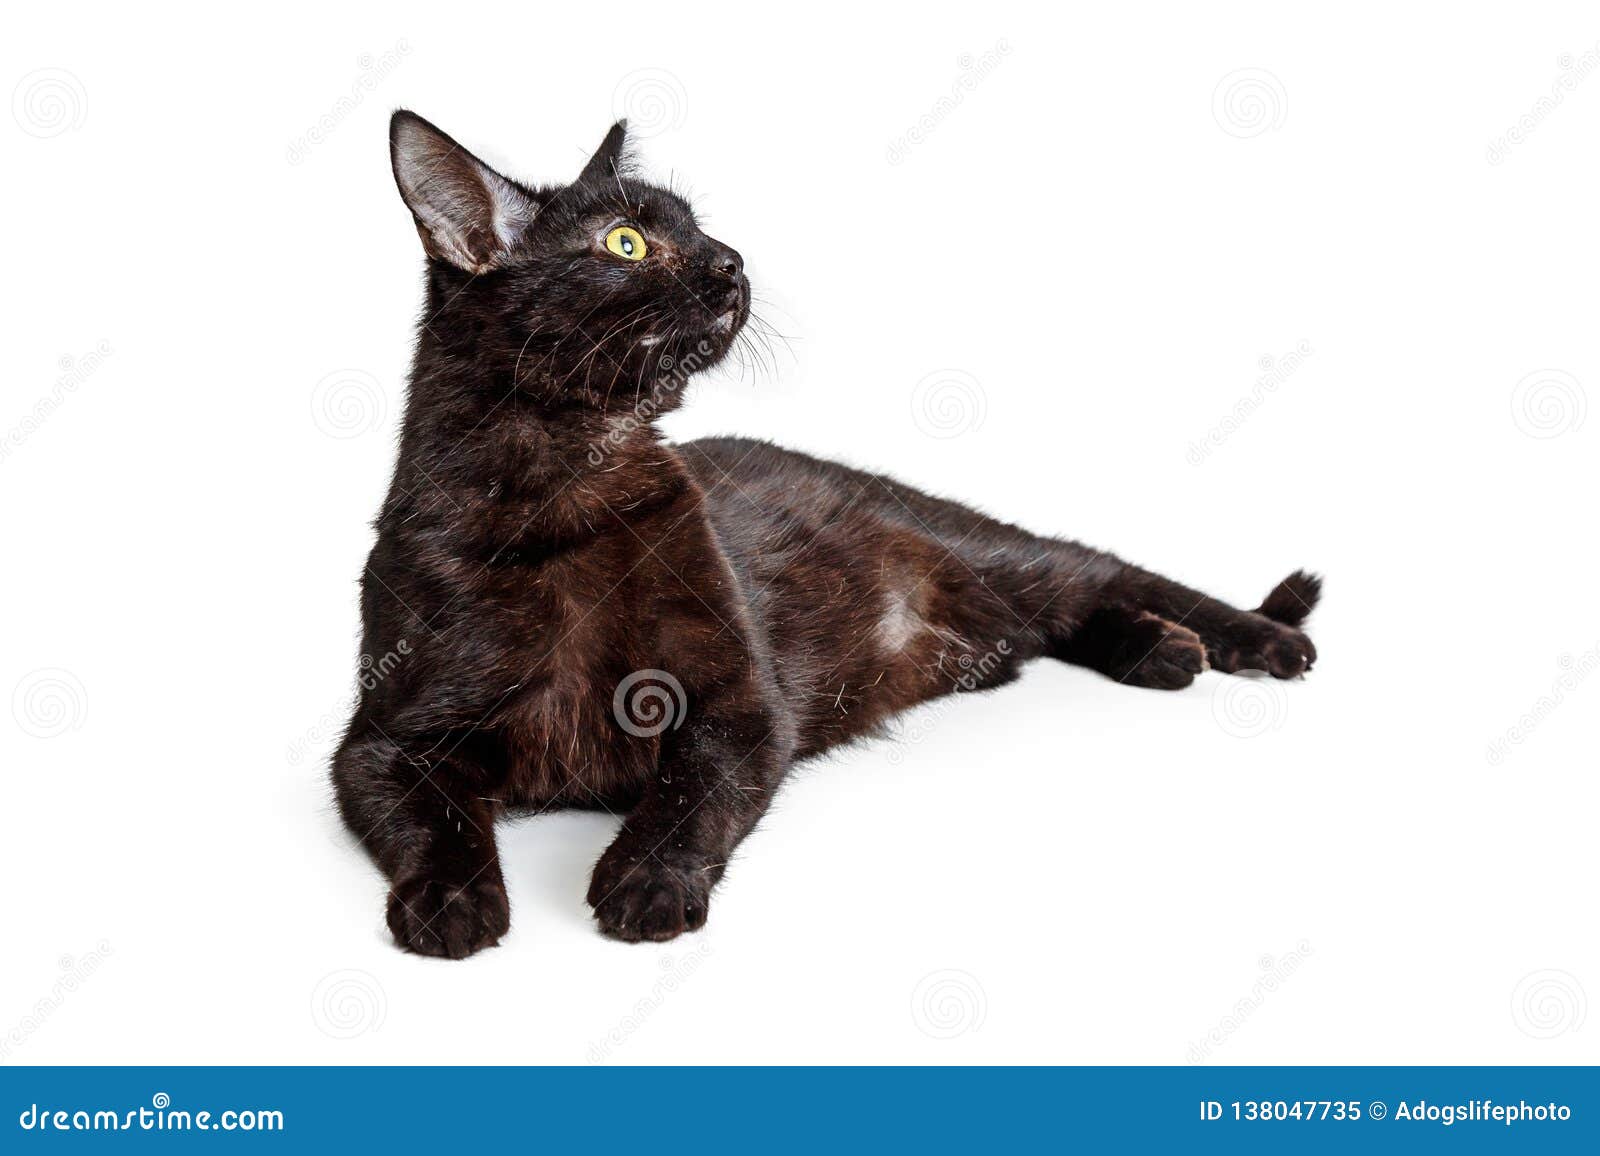 black cat lying down looking side - extracted